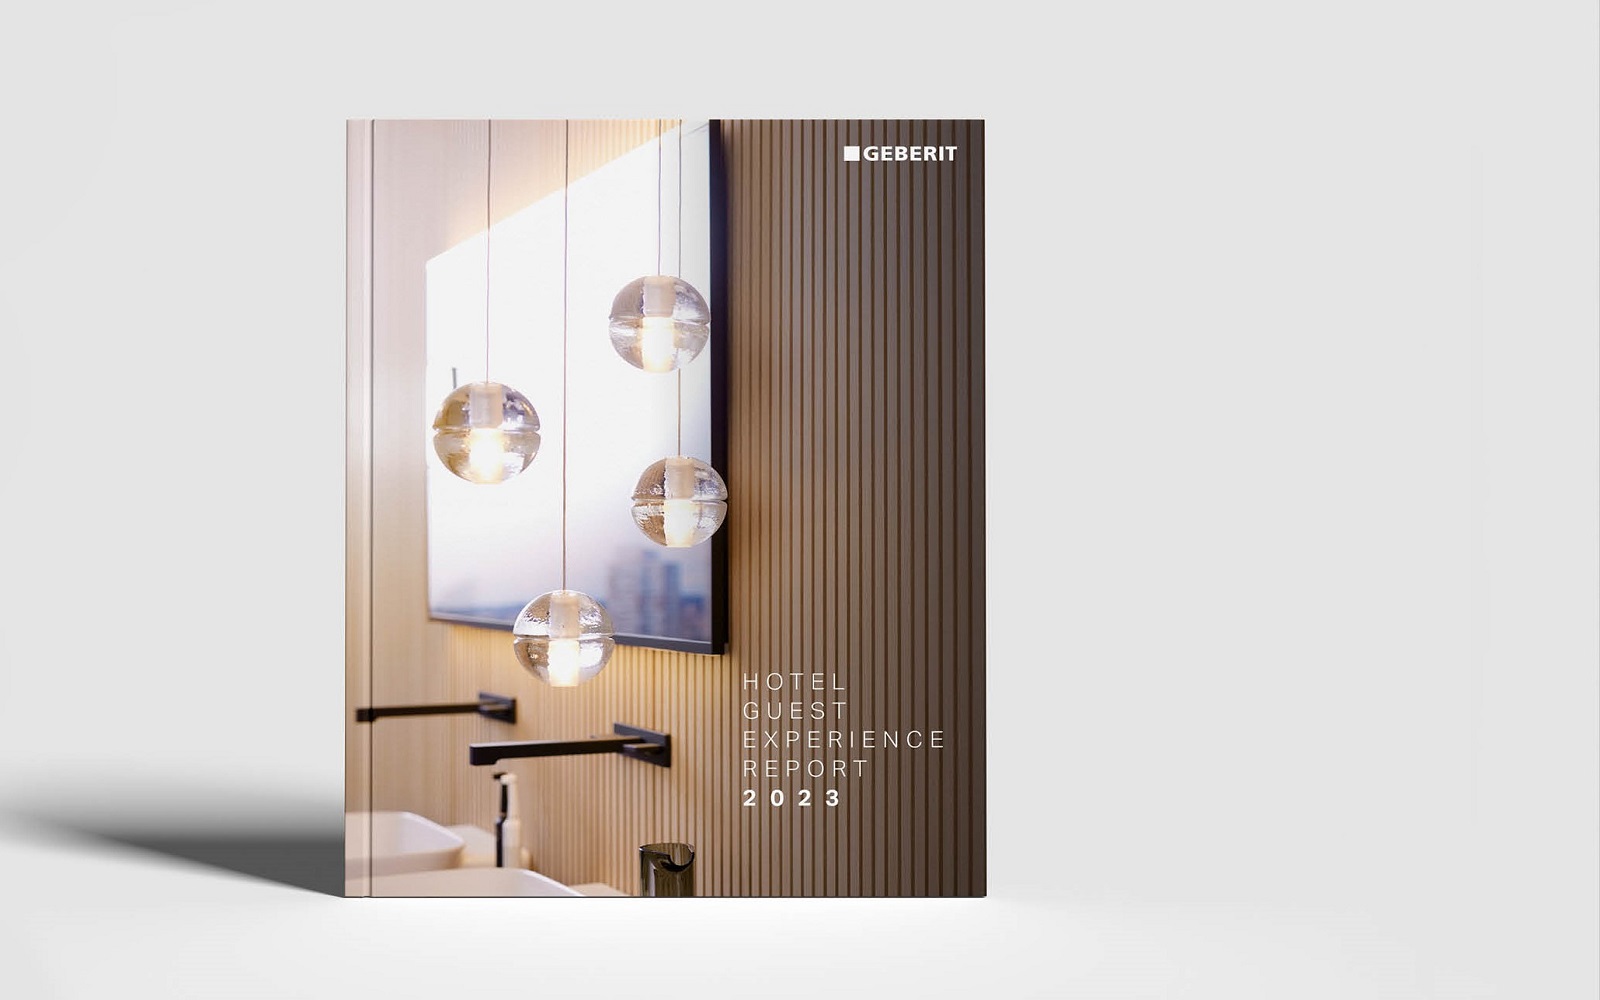 luxury bathroom detail on the front cover of the Geberit 2023 Hotel Guest Experience Report